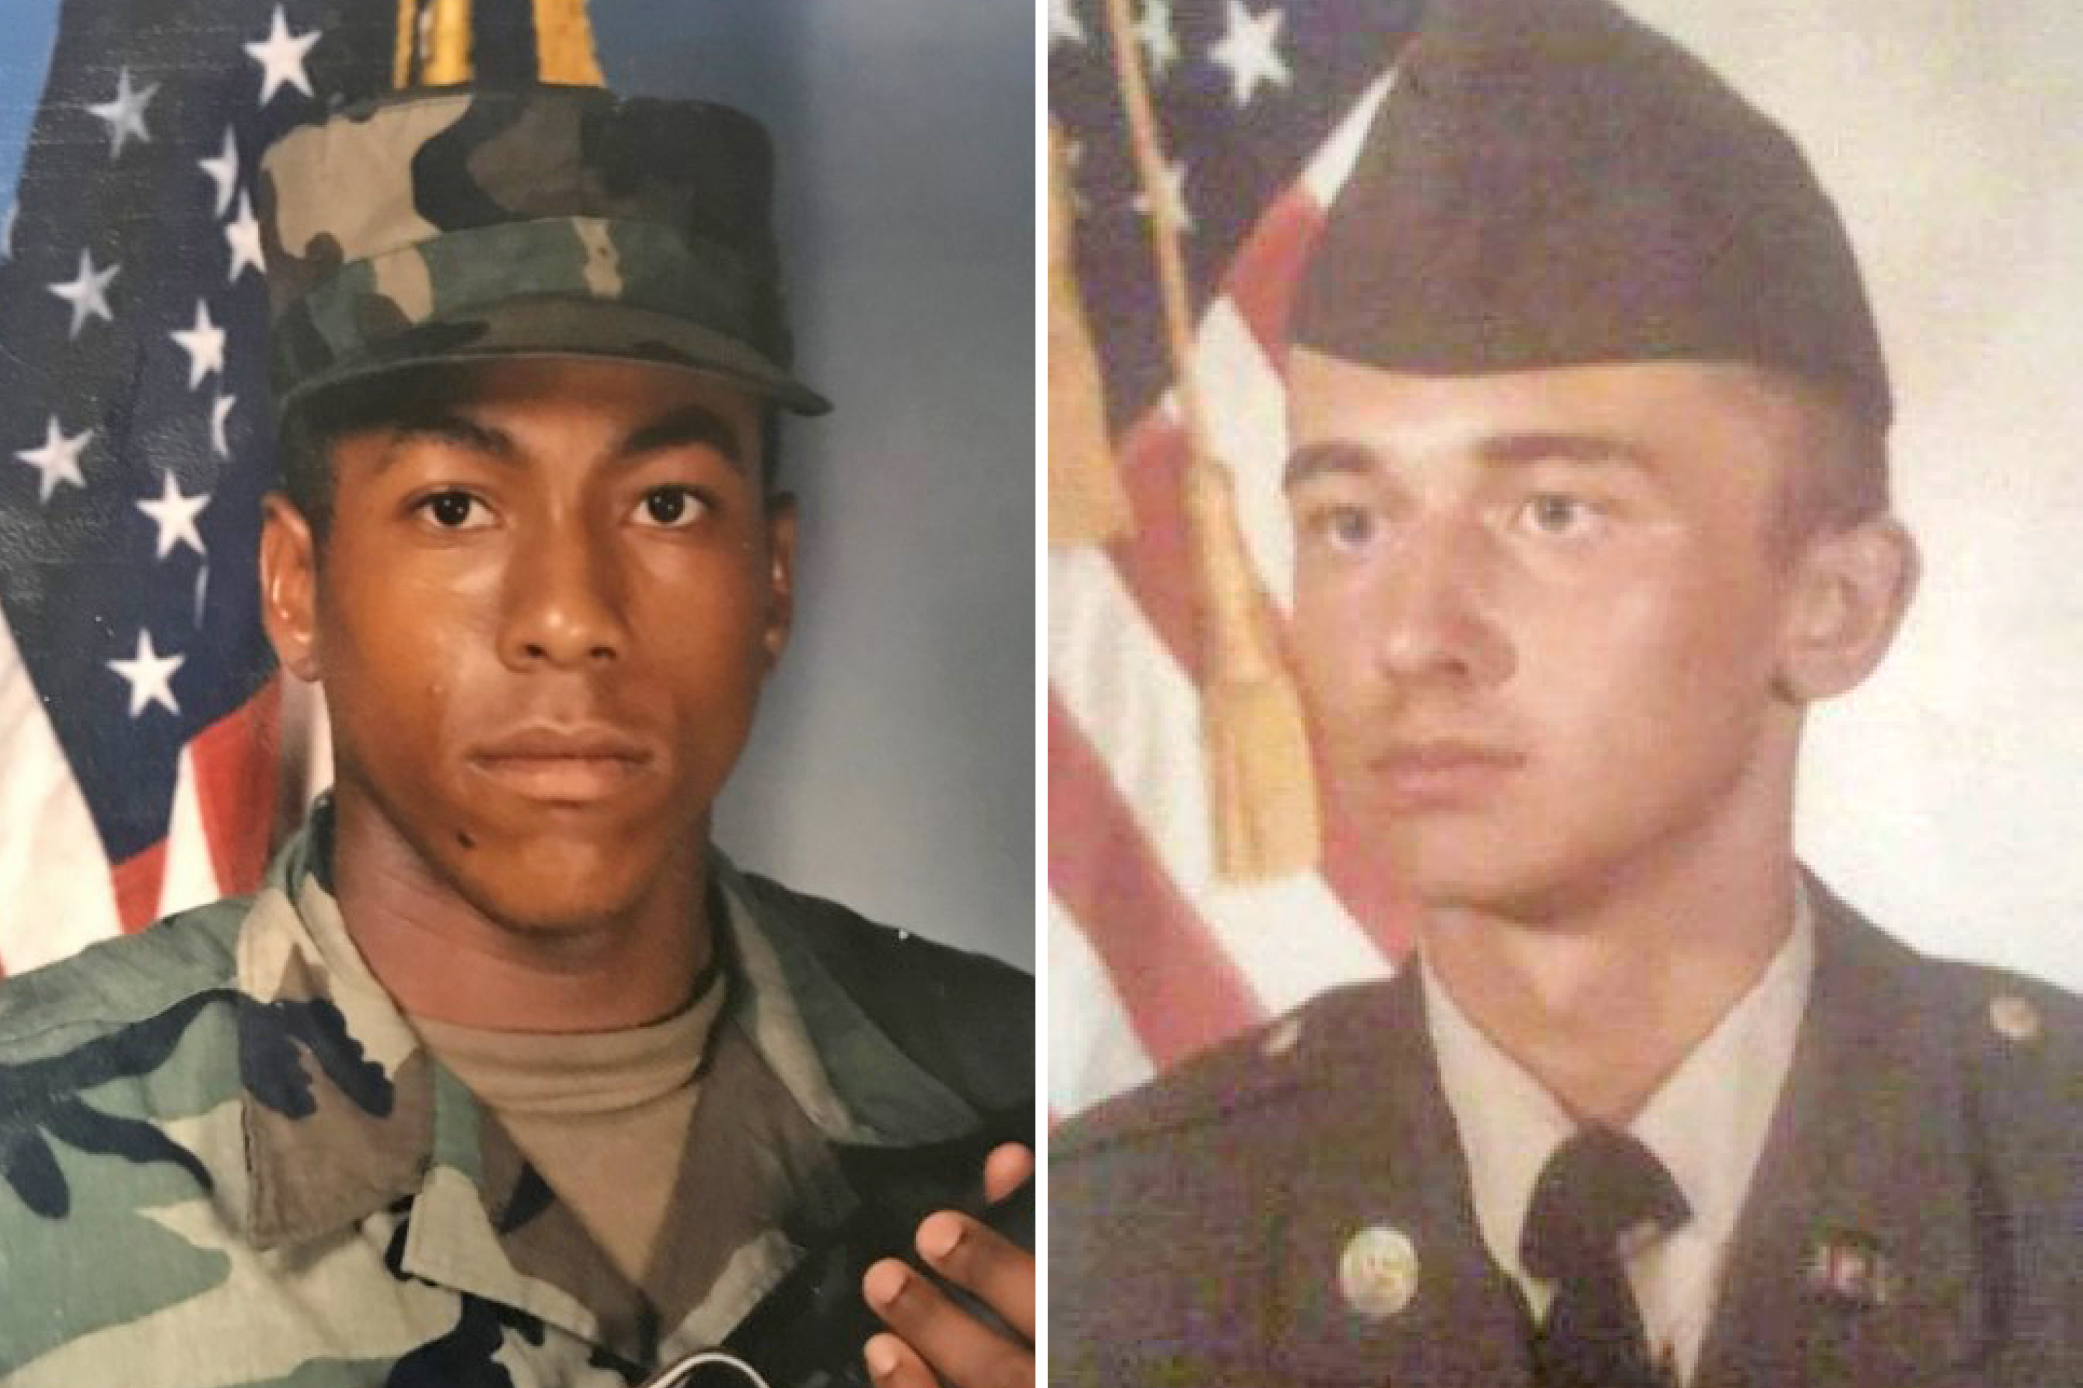 Side-by-side images of two male army soldiers